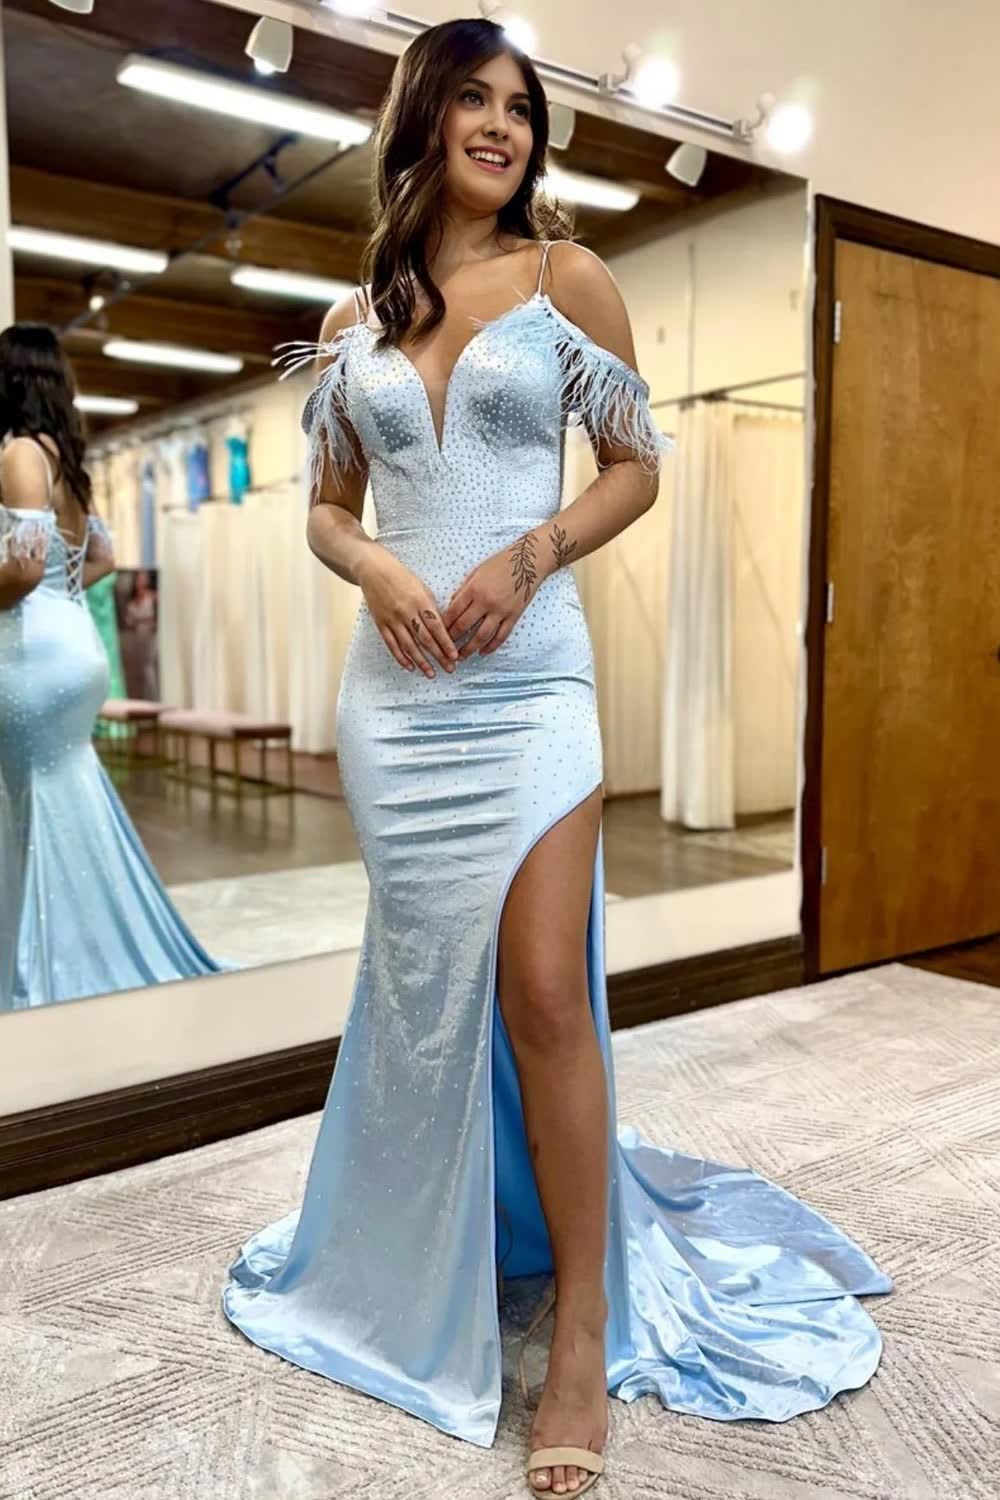 Sparkly Light Blue Sequins Mermaid Long Corset Prom Dress with Feathers outfit, Sparkly Light Blue Sequins Mermaid Long Prom Dress with Feathers